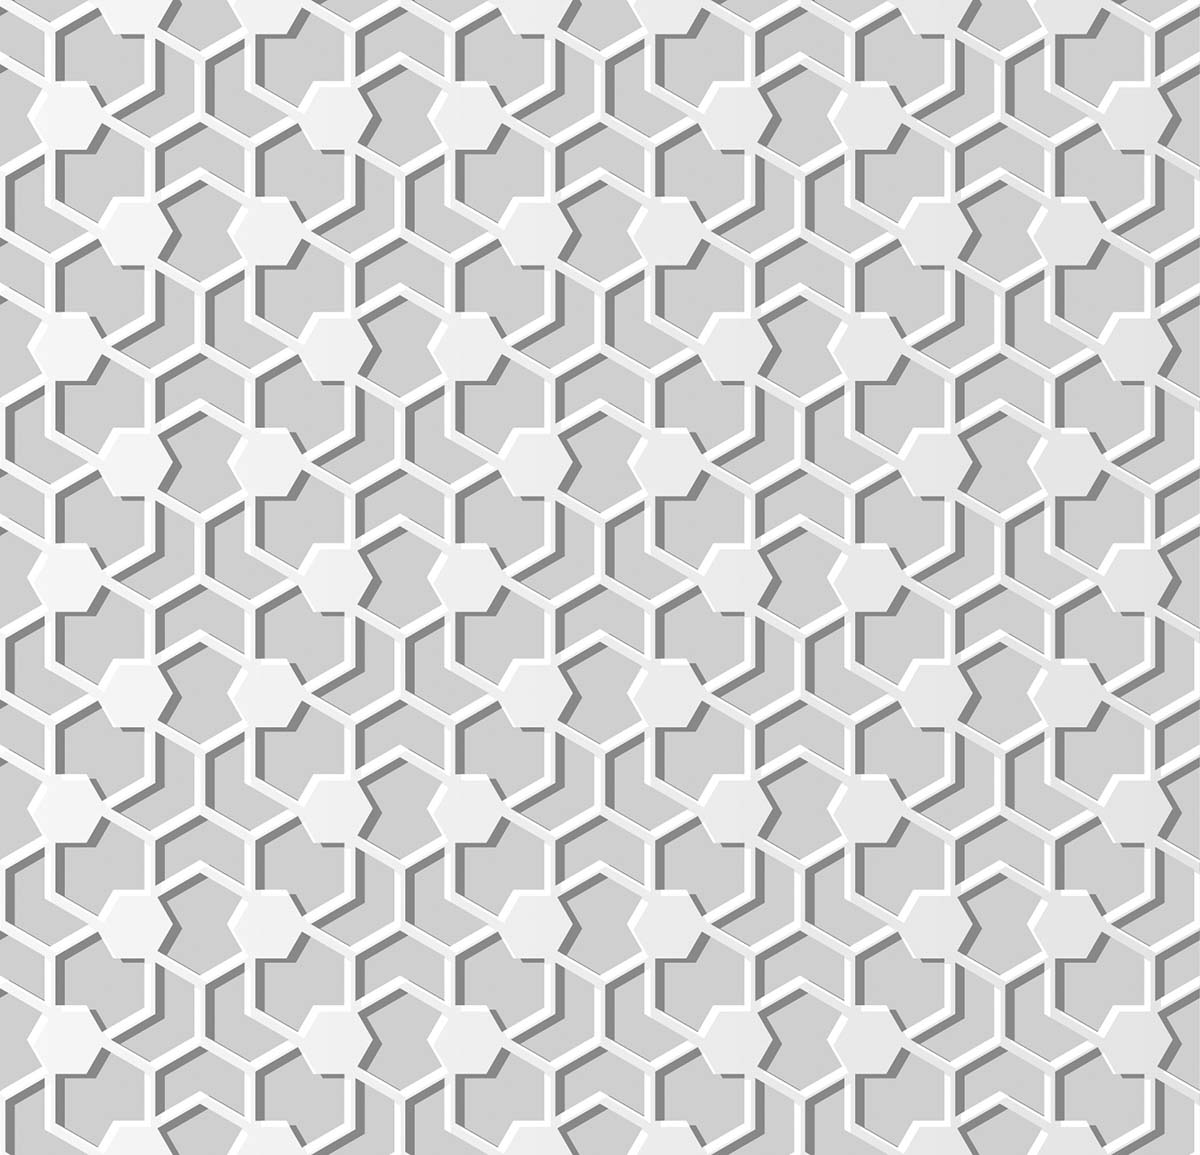 A white pattern with hexagons